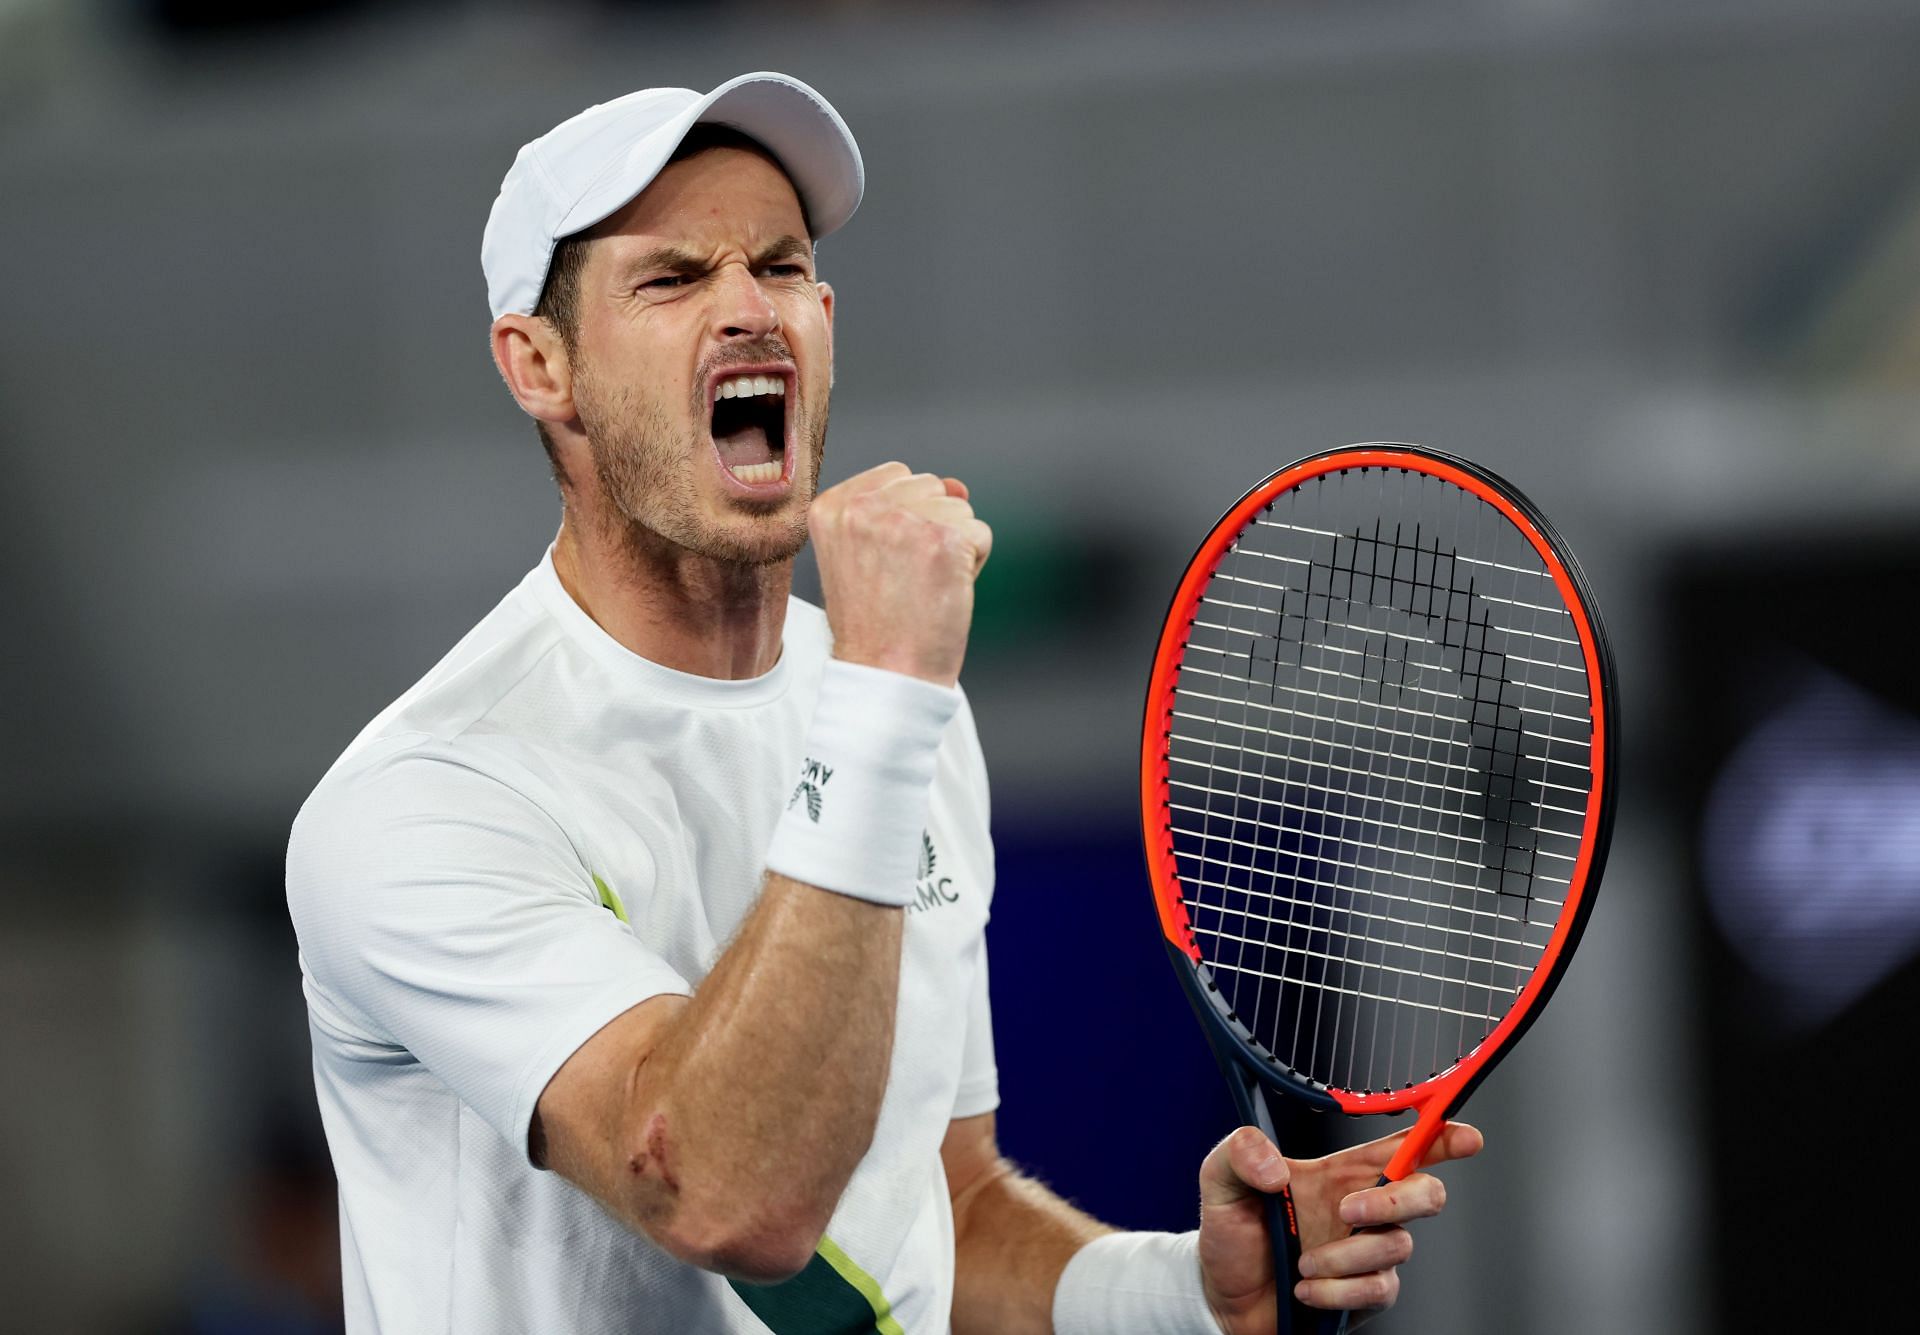 Andy Murray has received a wildcard in the Dubai tournament